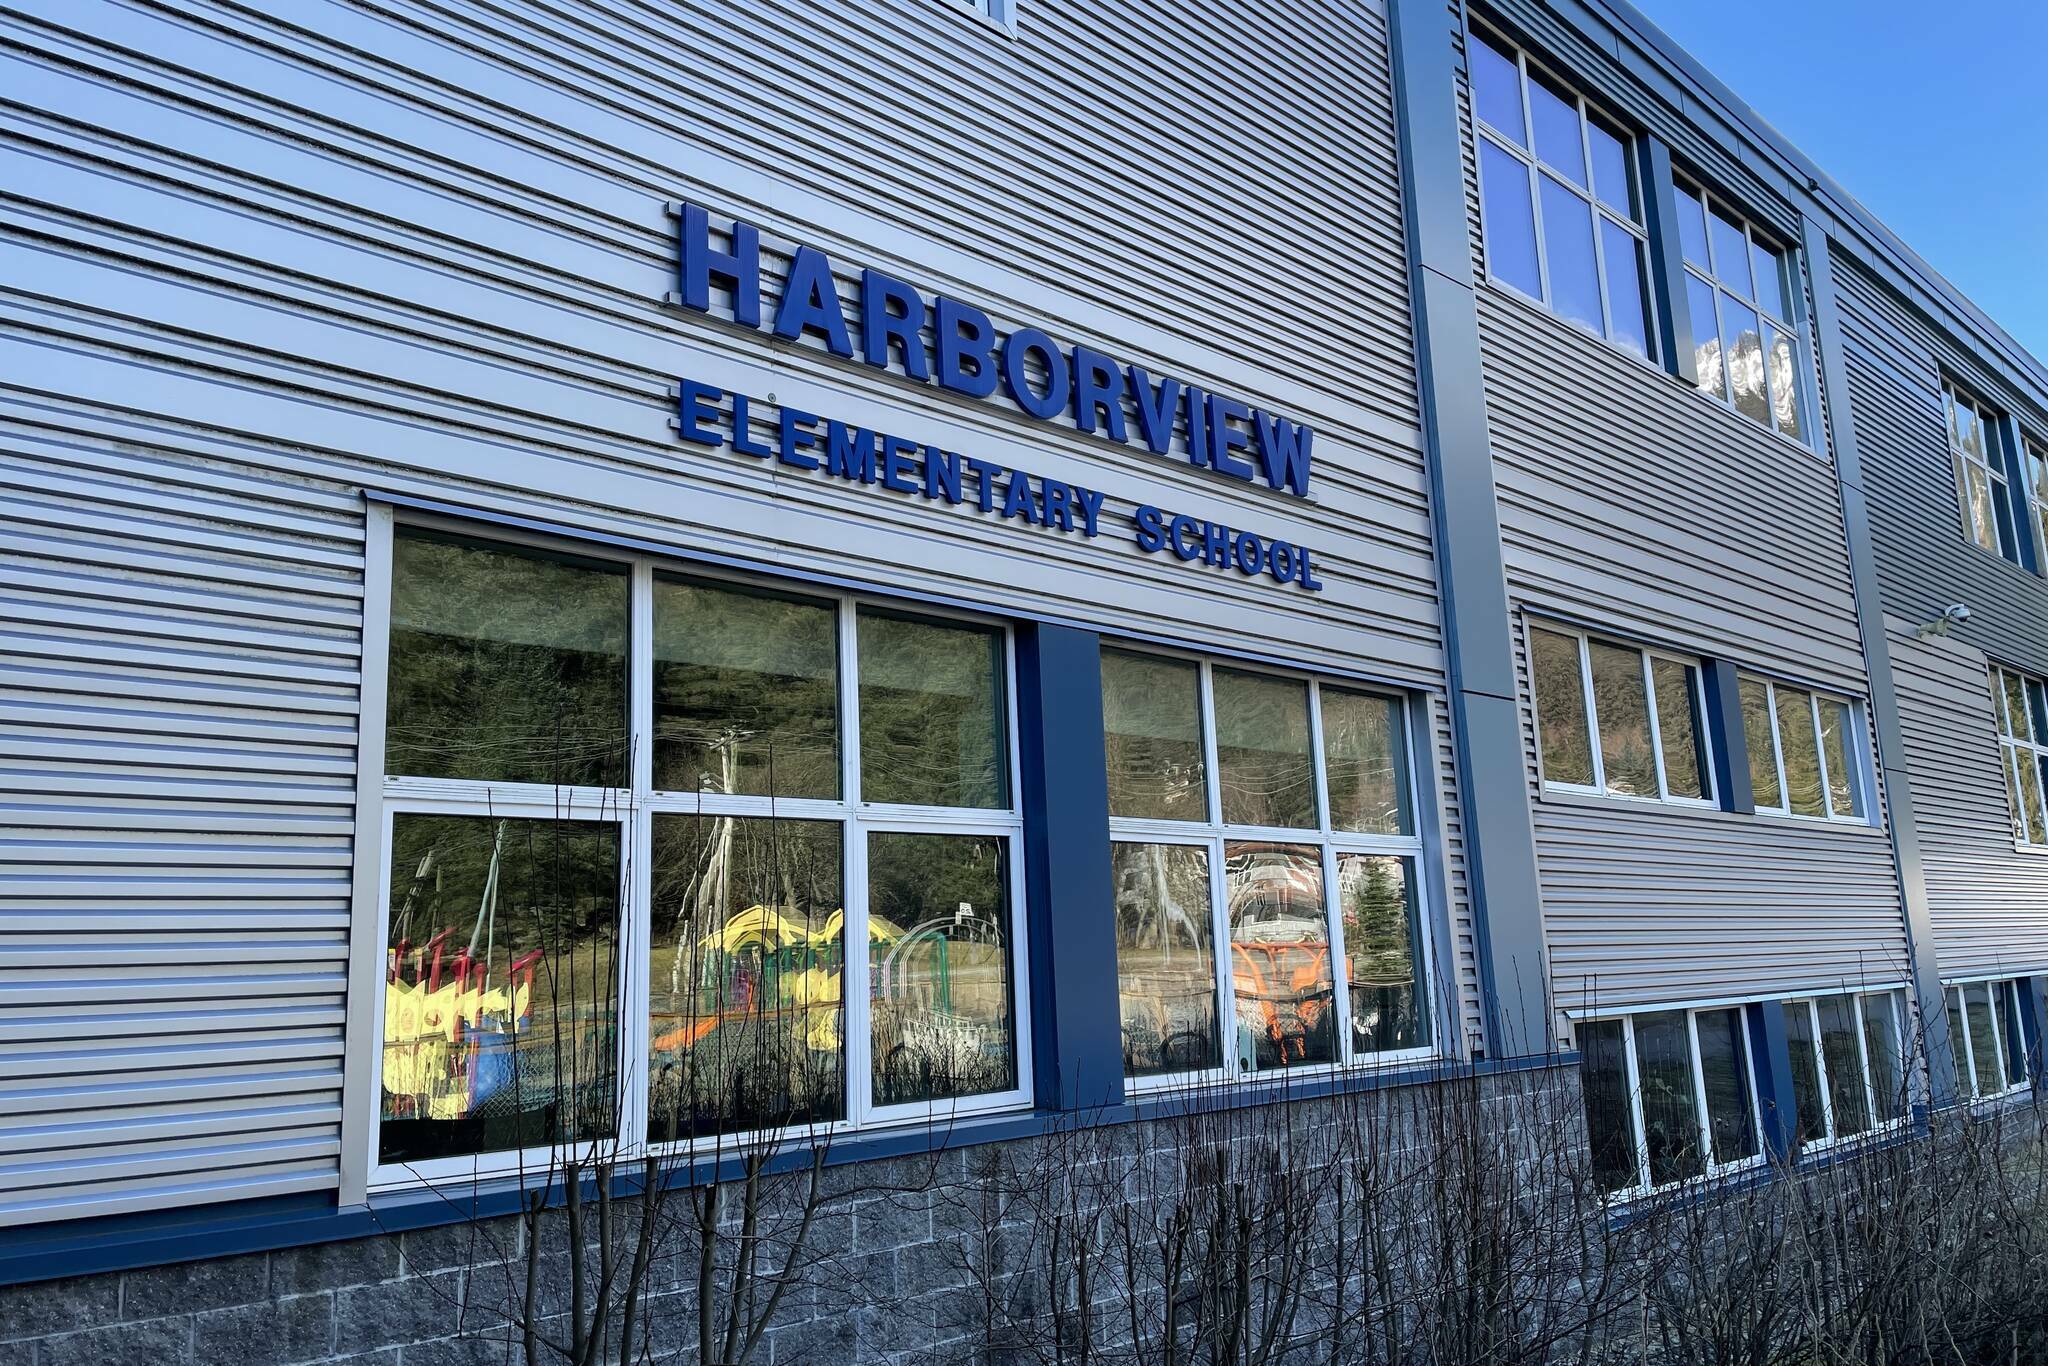 Harborview Elementary School was briefly evacuated Friday after a bomb threat was received at midday, according to the Juneau Police Department. (Michael S. Lockett / Juneau Empire file photo)